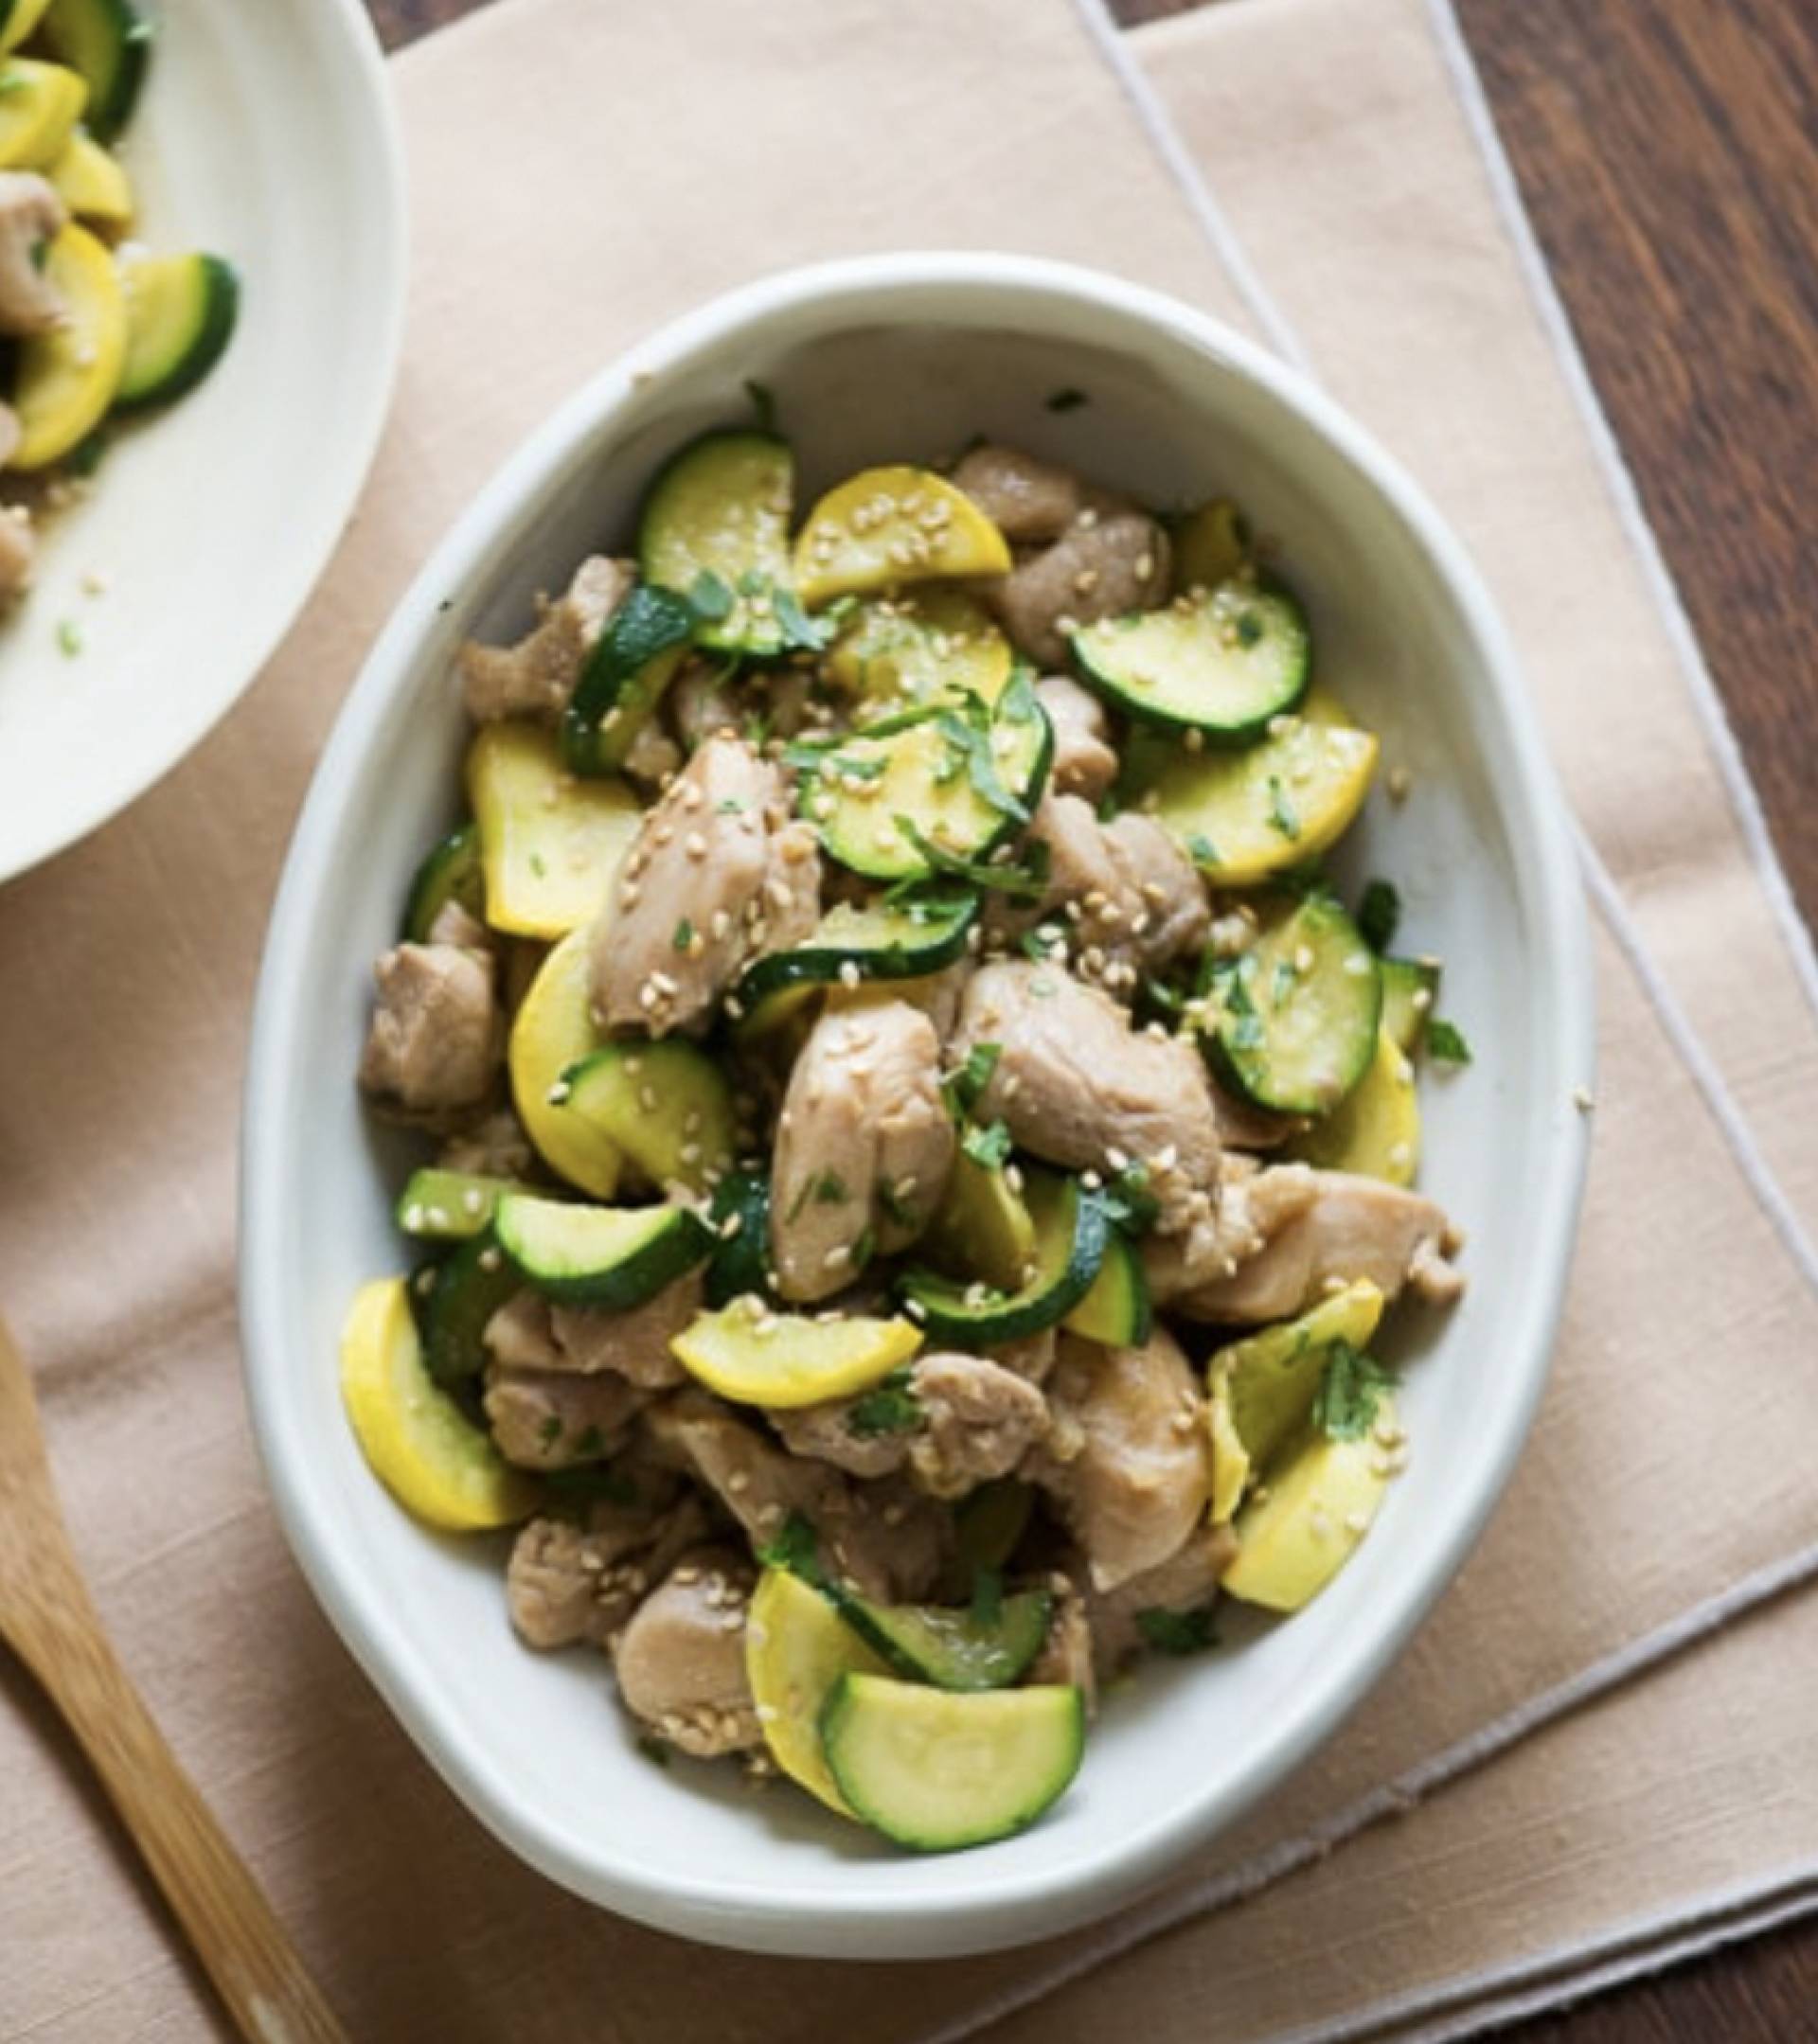 House Chicken with Zucchini and Squash and Teriyaki Sauce (GL)